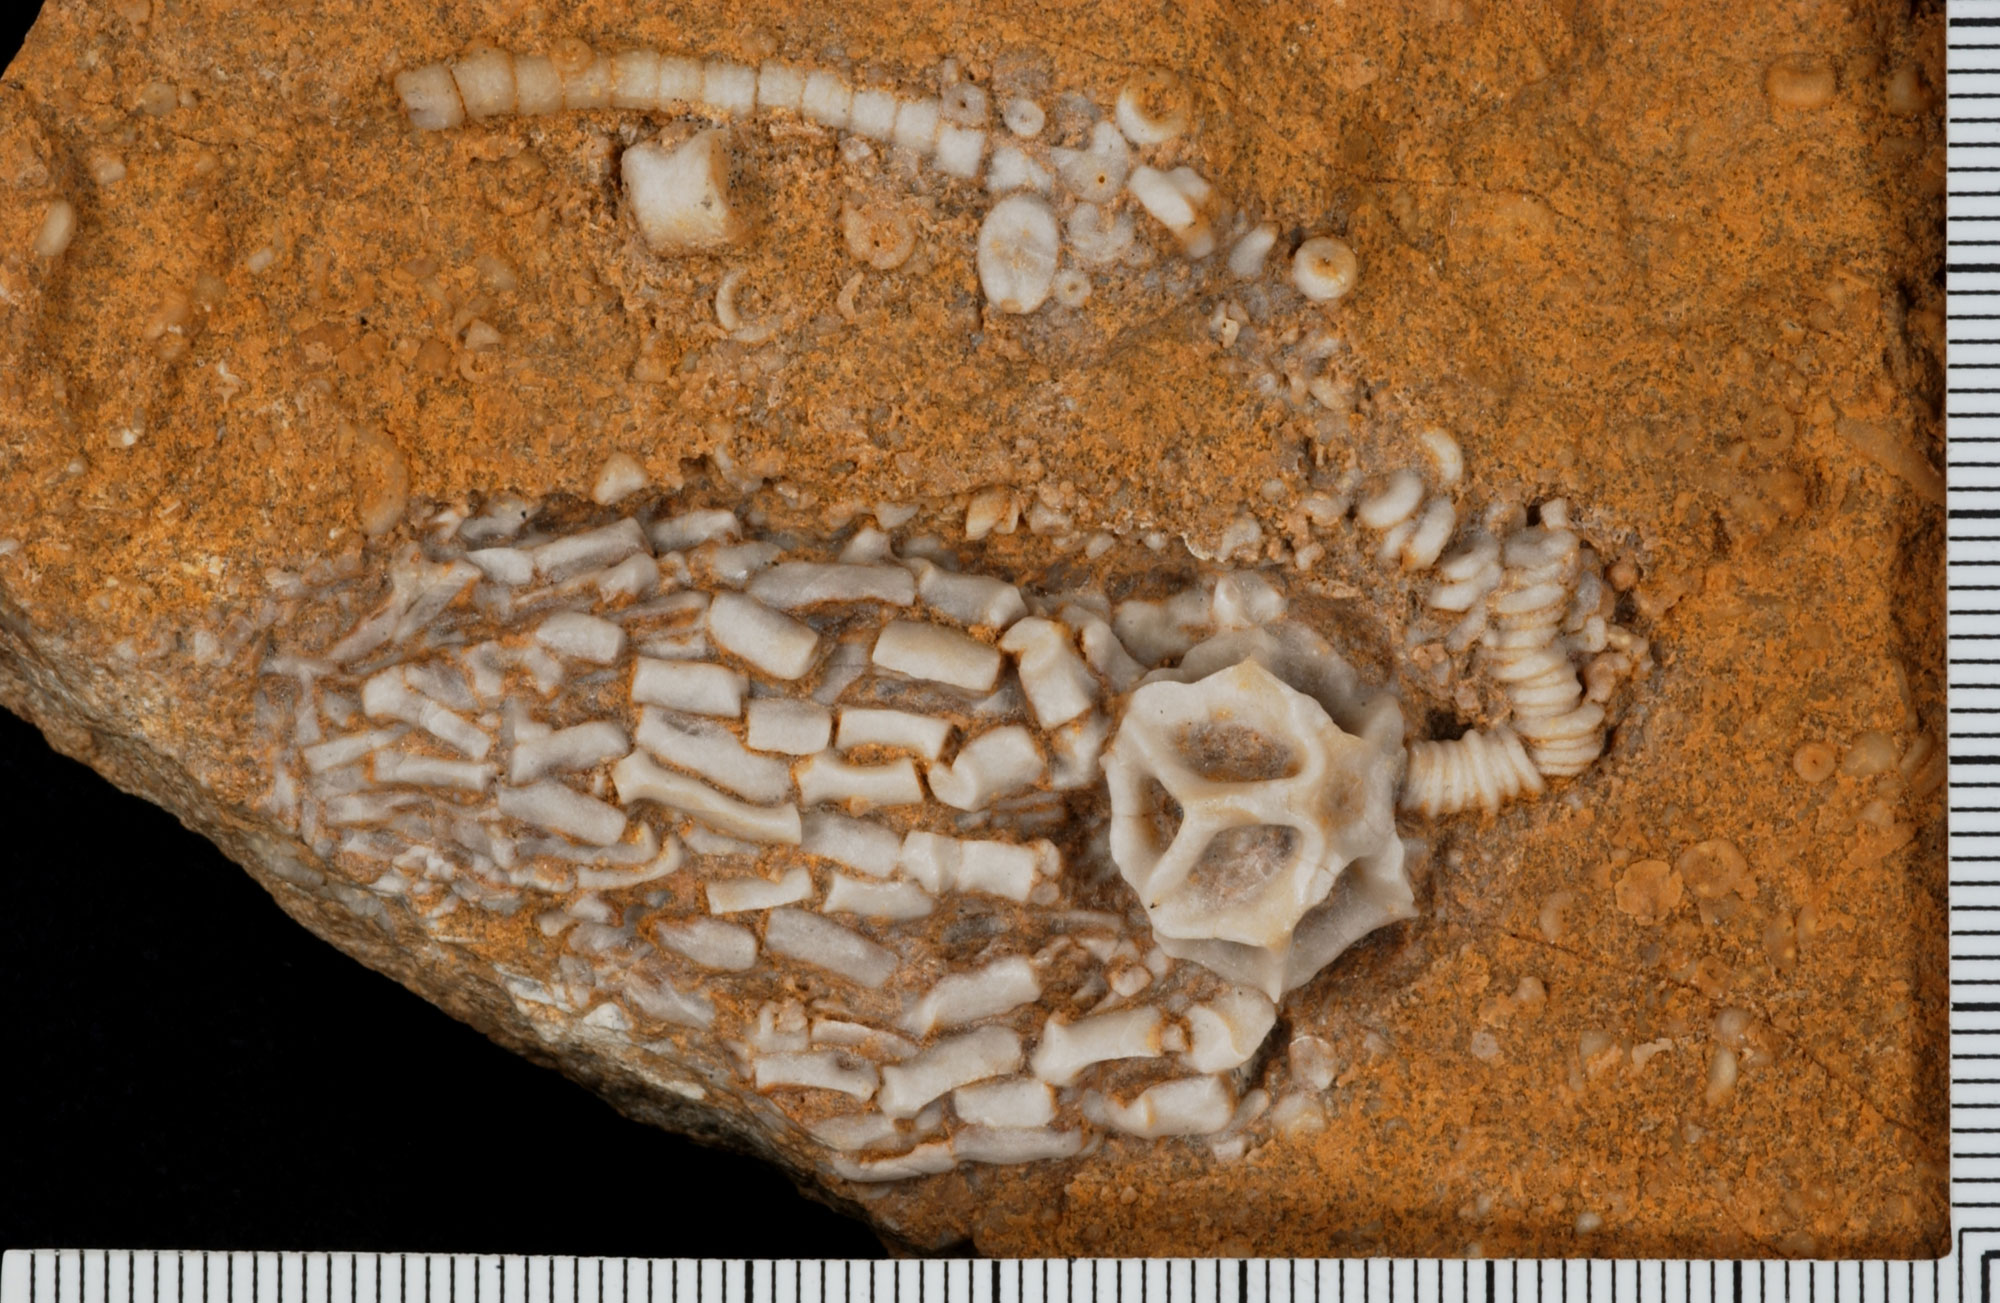 Photo of a fossil crinoid (calyx, arms, and stalk). The pieces of the crinoid are beige whereas the rock matrix surrounding the specimen is orange.